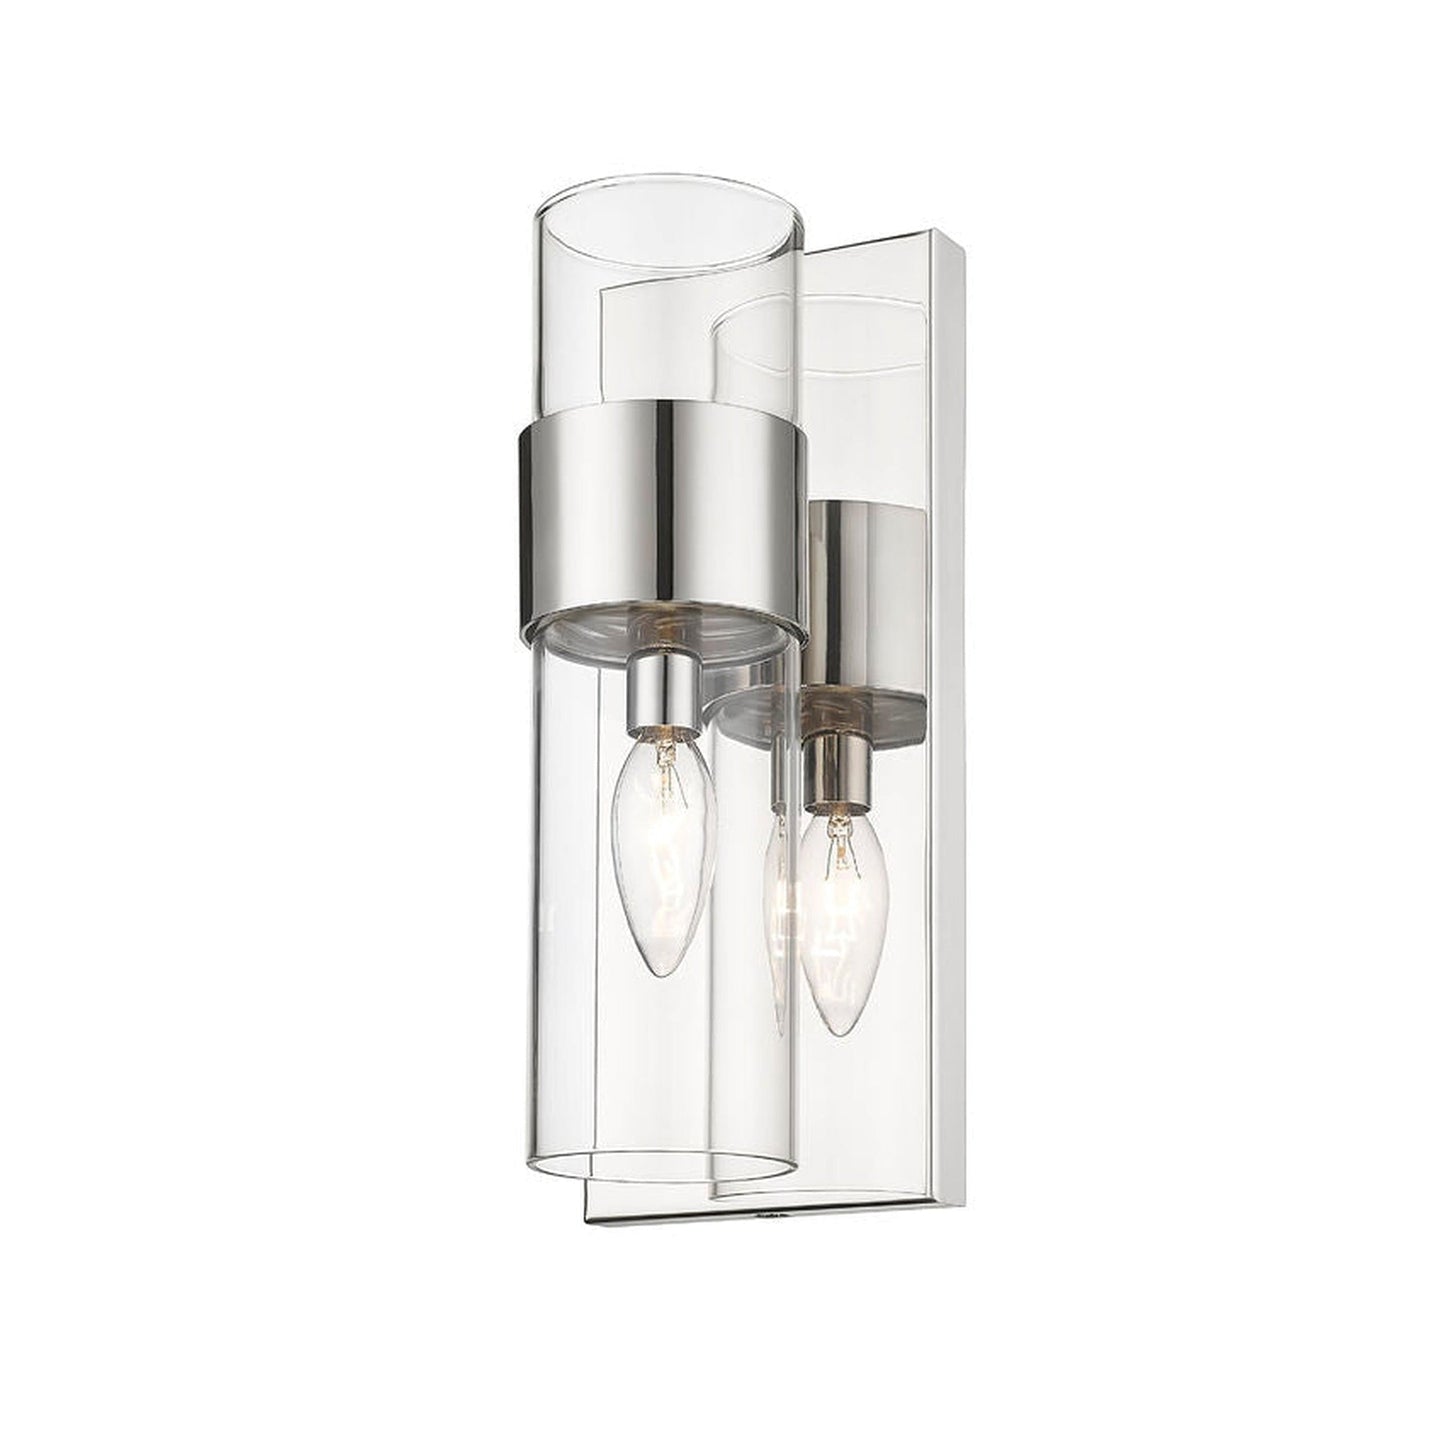 Z-Lite Lawson 5" 1-Light Polished Nickel Wall Sconce With Clear Glass Shade